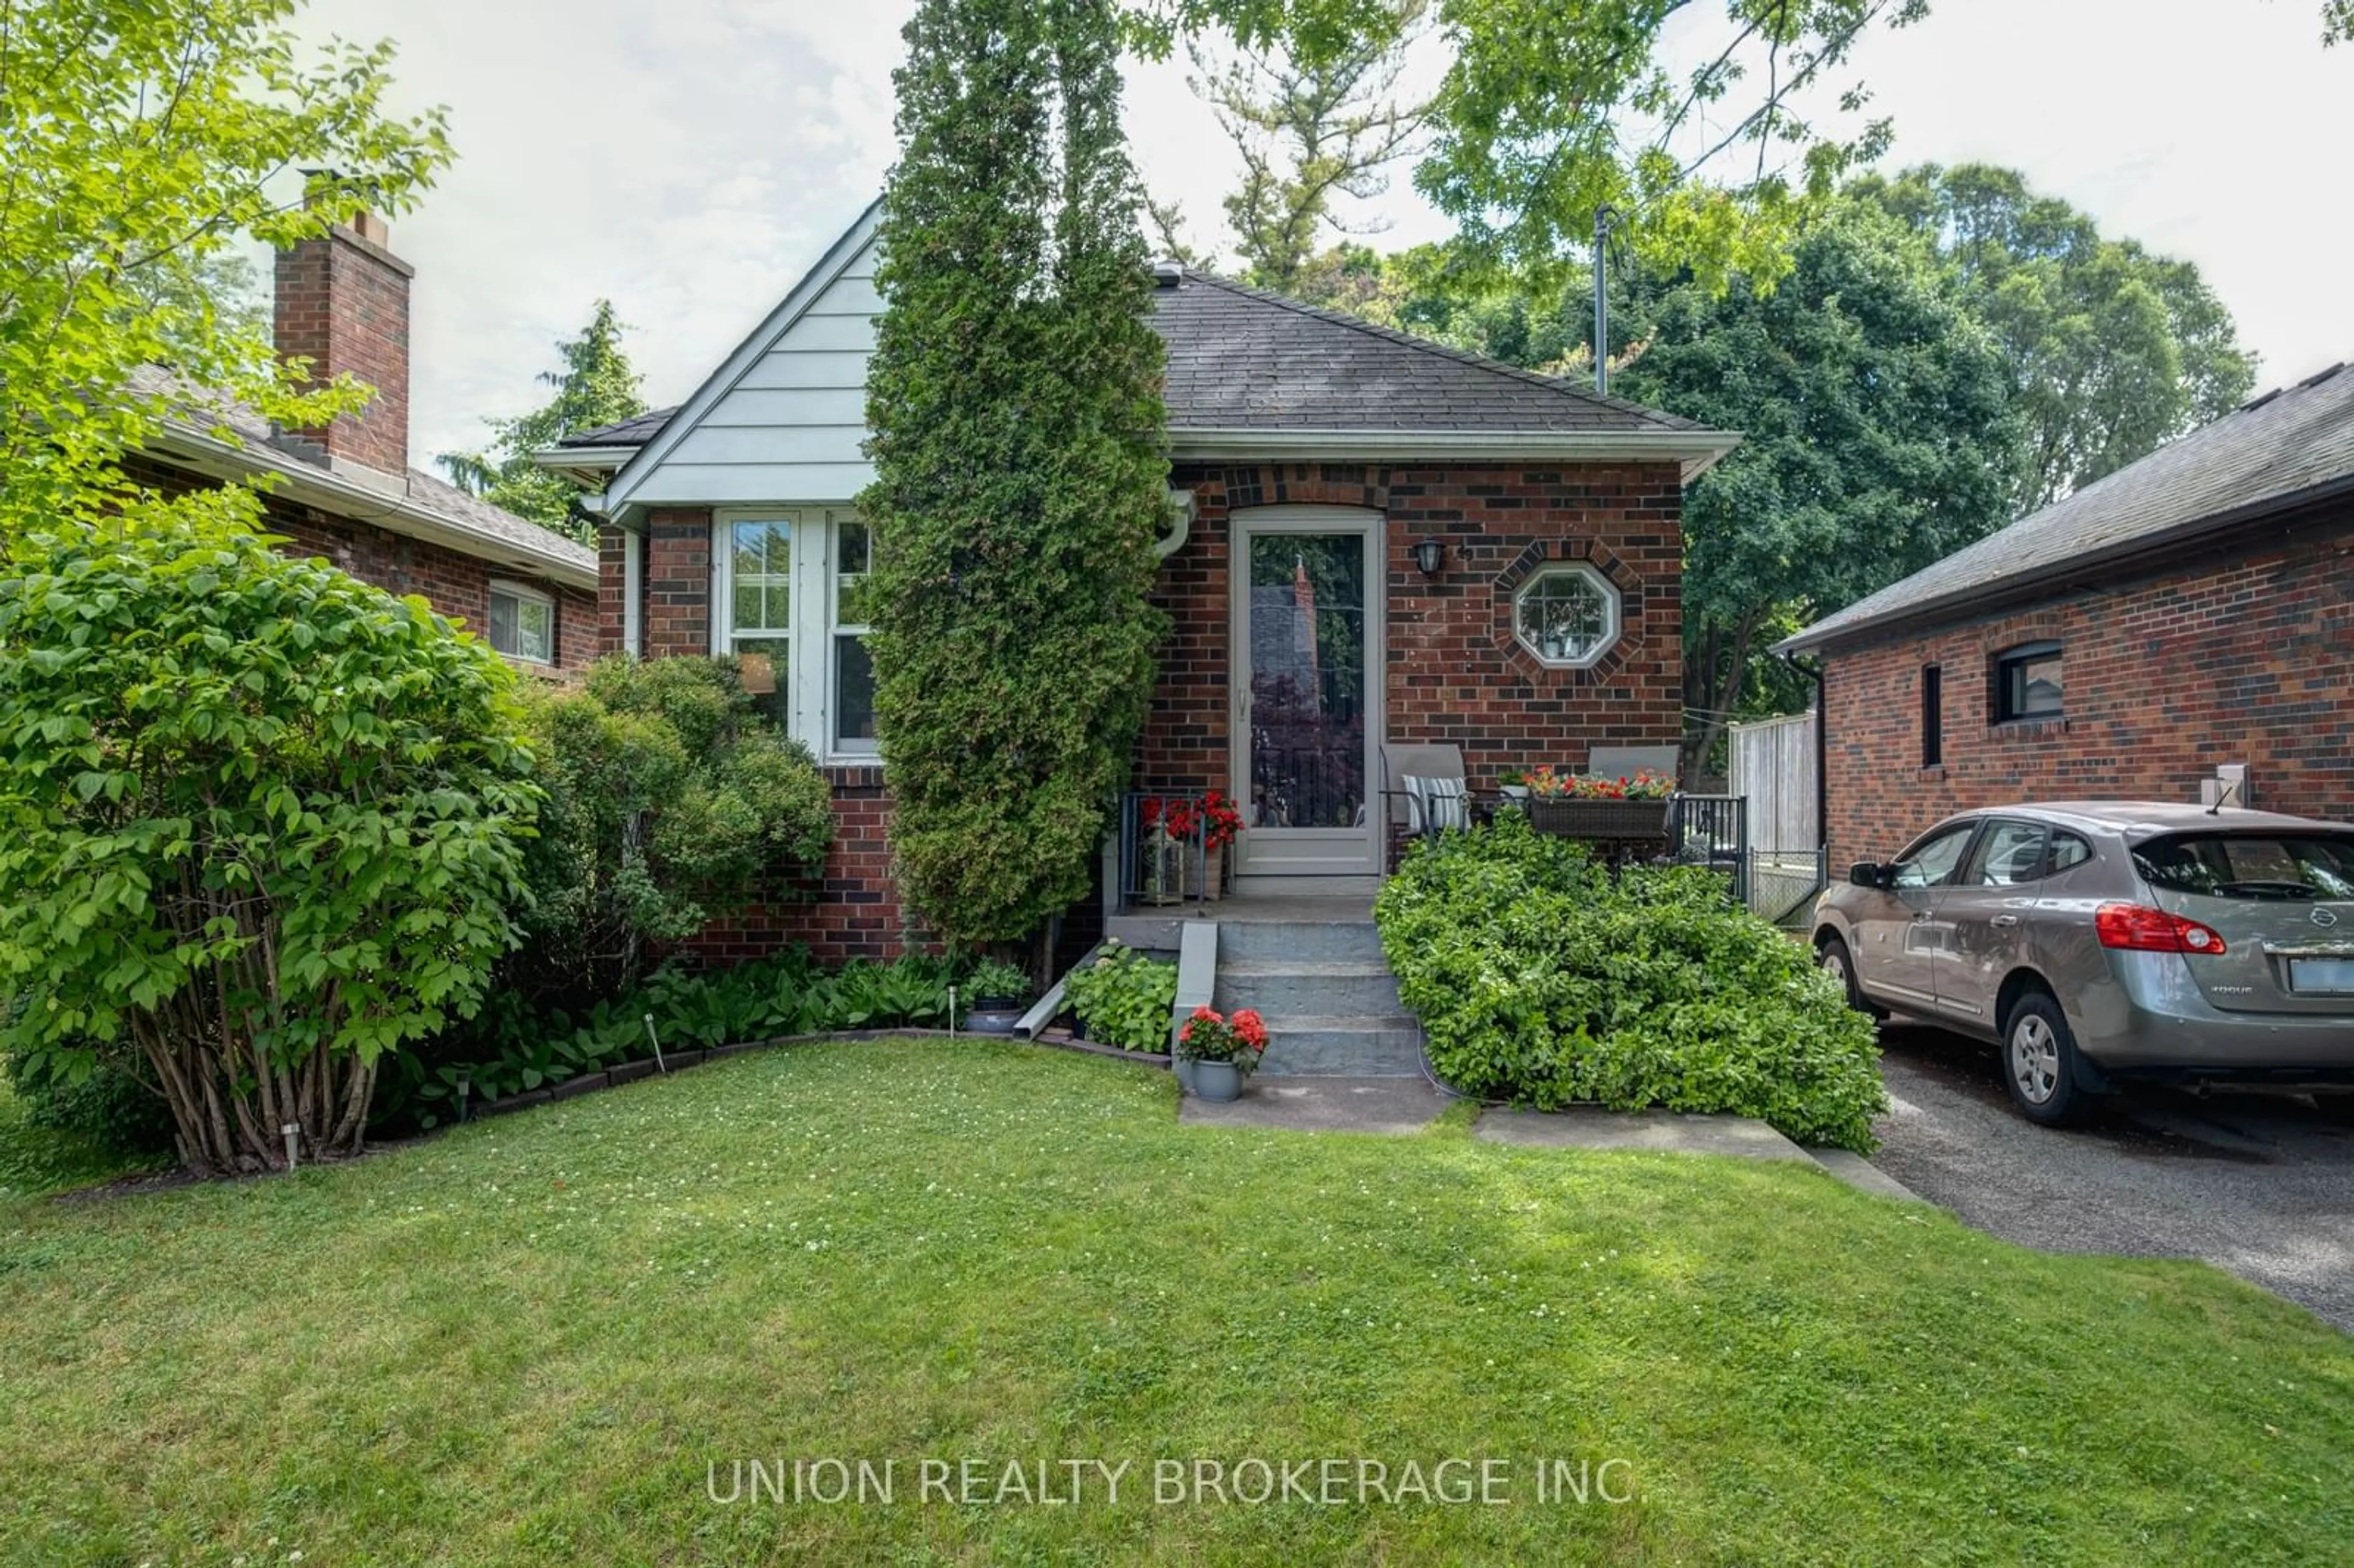 Home with brick exterior material for 49 Red Deer Ave, Toronto Ontario M1N 2Z2